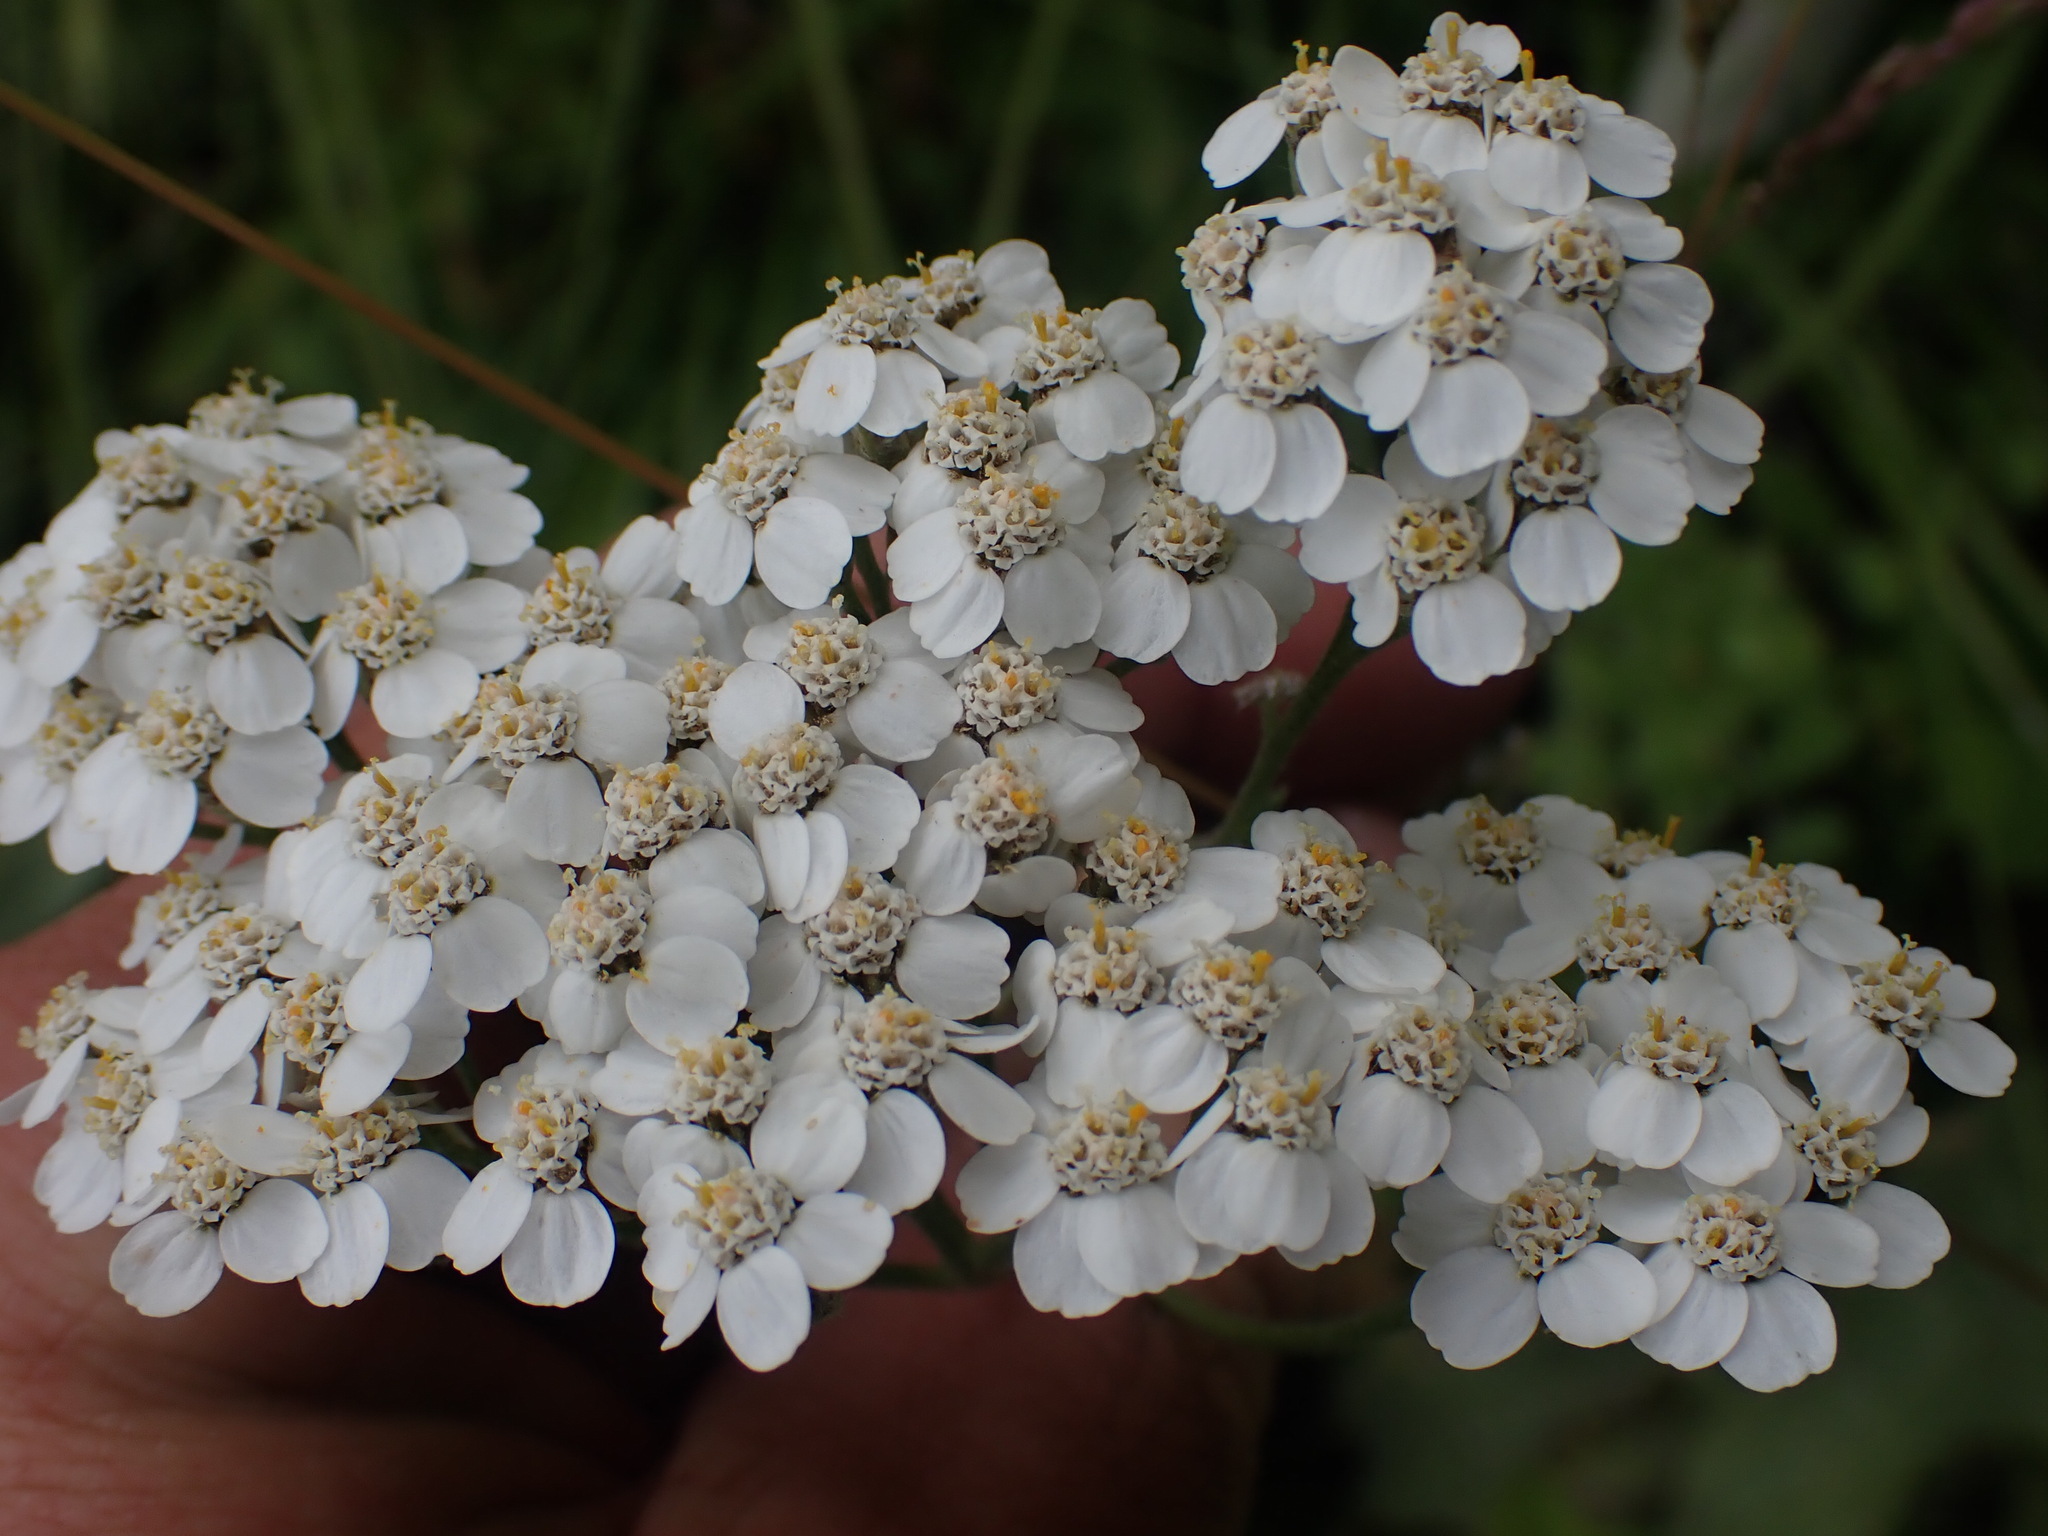 Photo of flowers with white “petals” surrounding a center disk containing yellow-white florets. These flowers are common yarrow and are surrounded by a hand. 